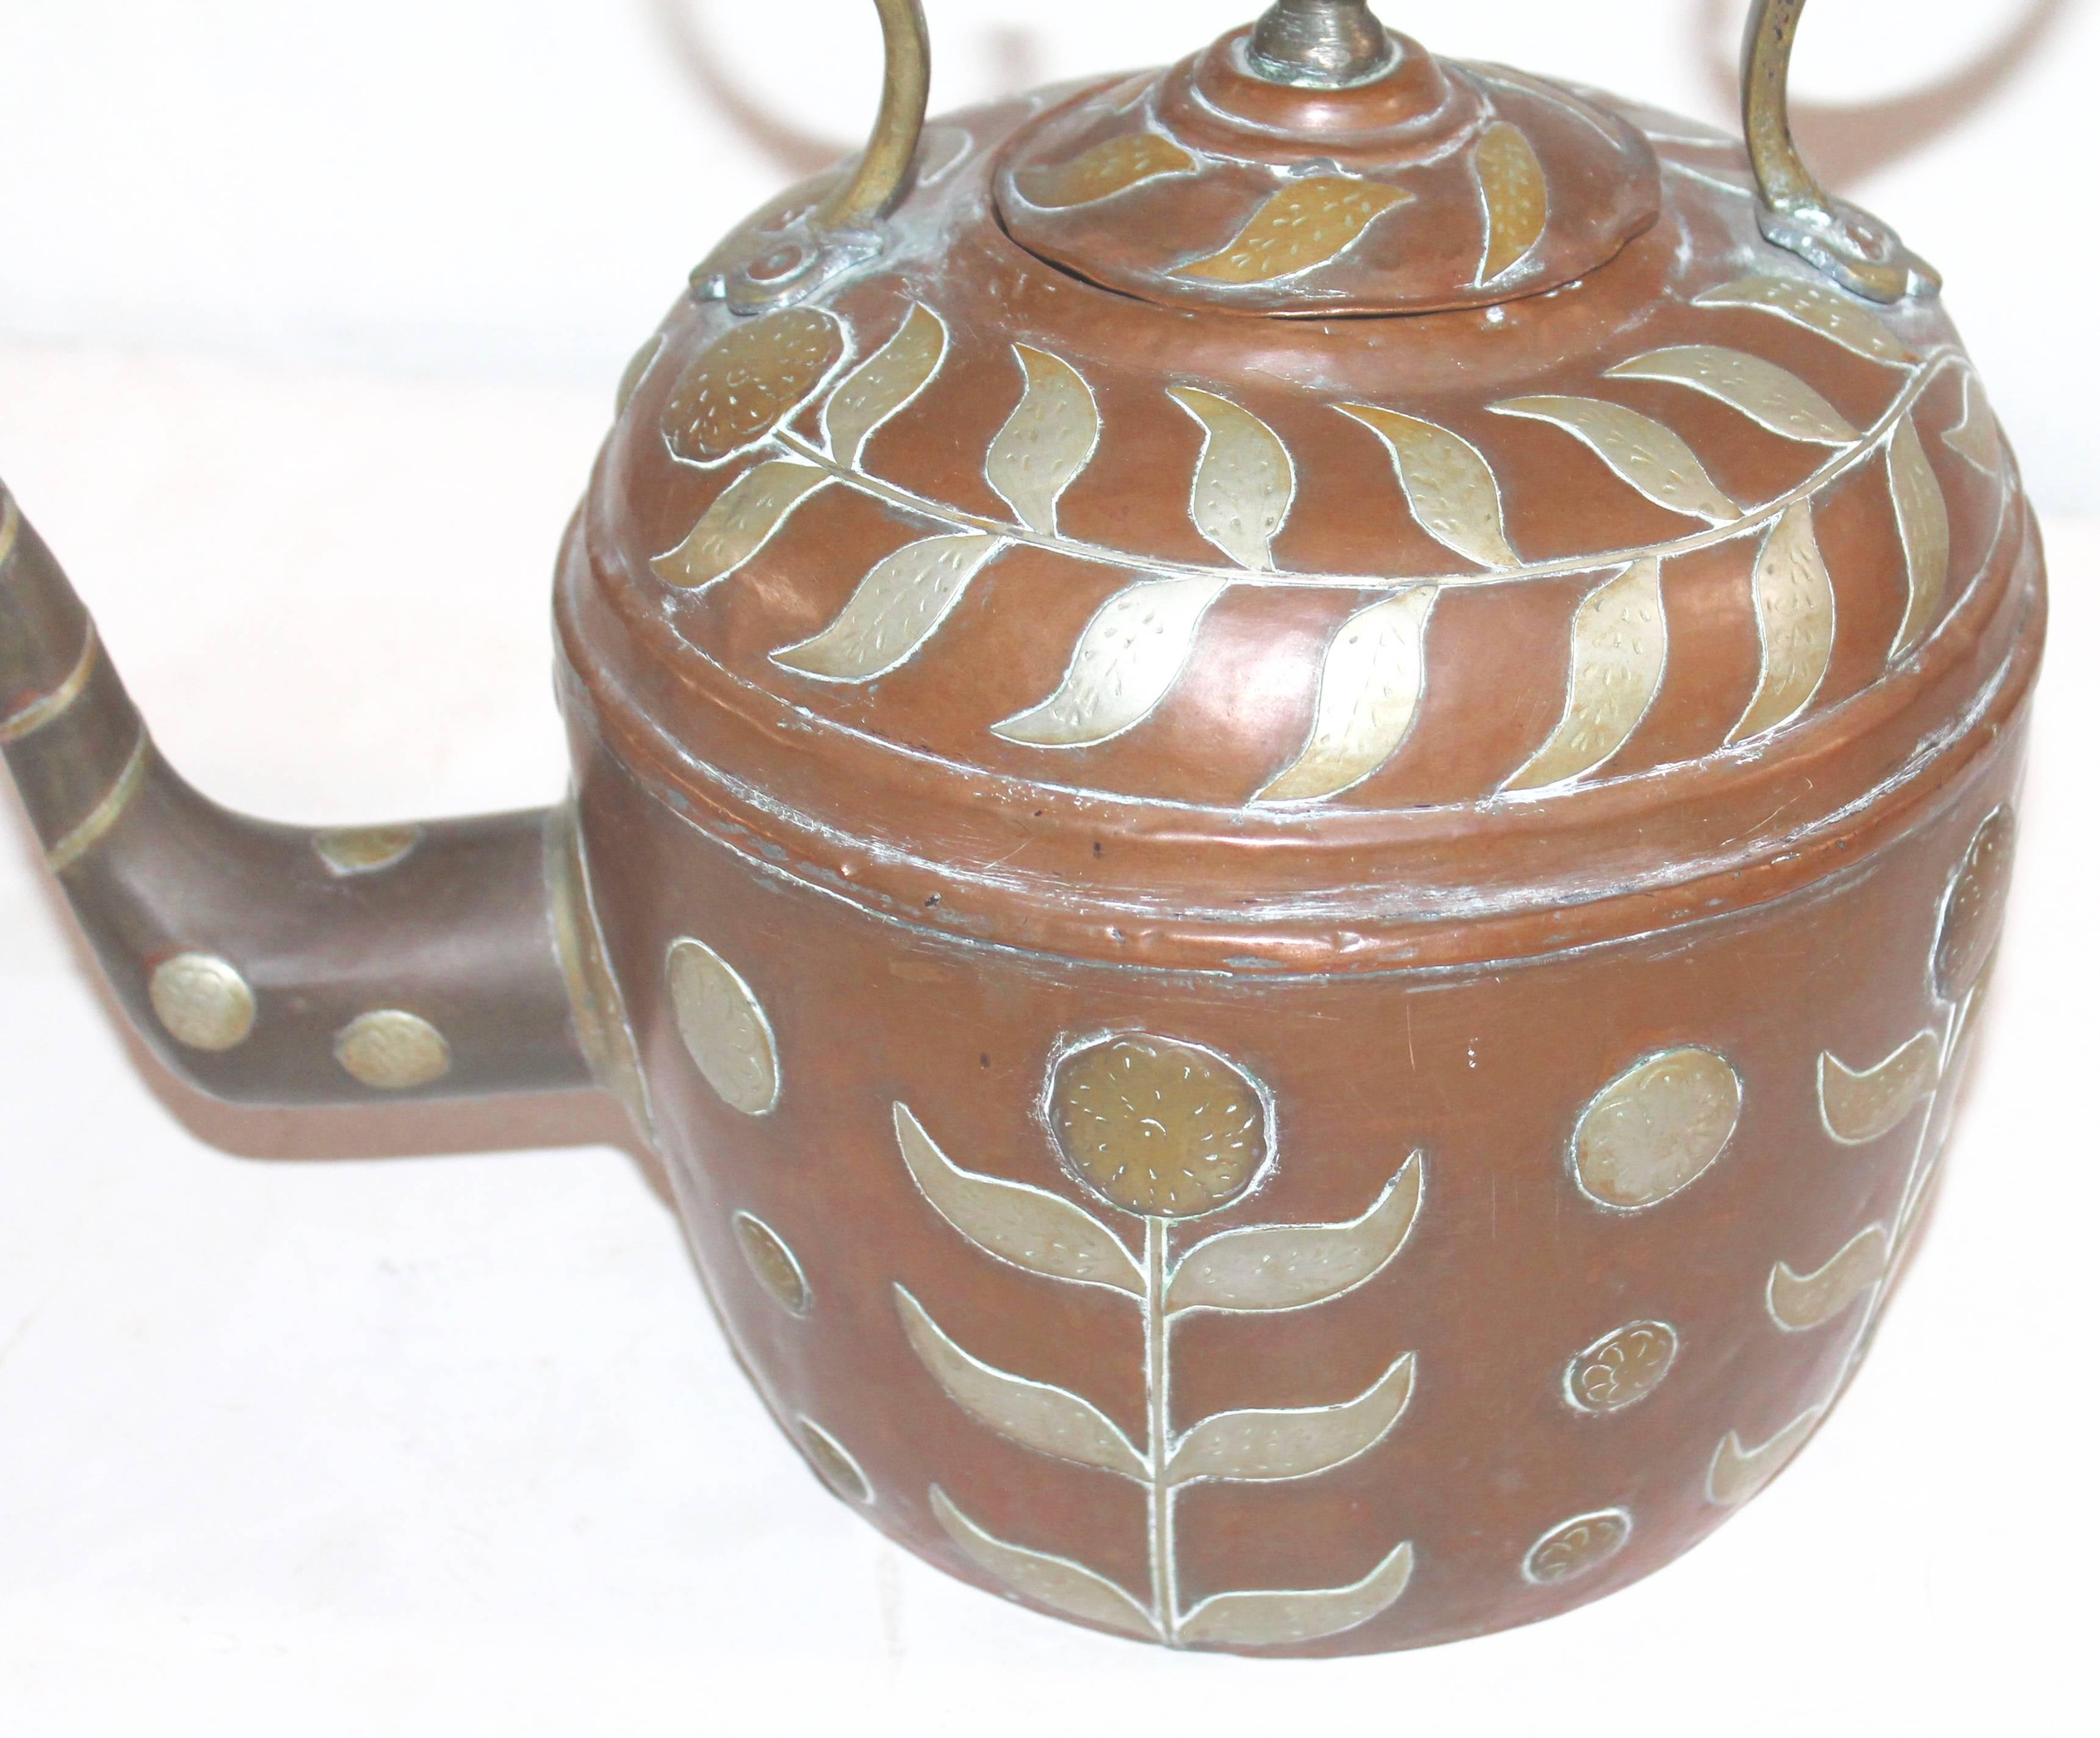 This highly decorated handmade copper kettle has appliqued sunflowers in silver and brass cutouts. The handle and stem is wrapped in silver applique work. The condition is very good.